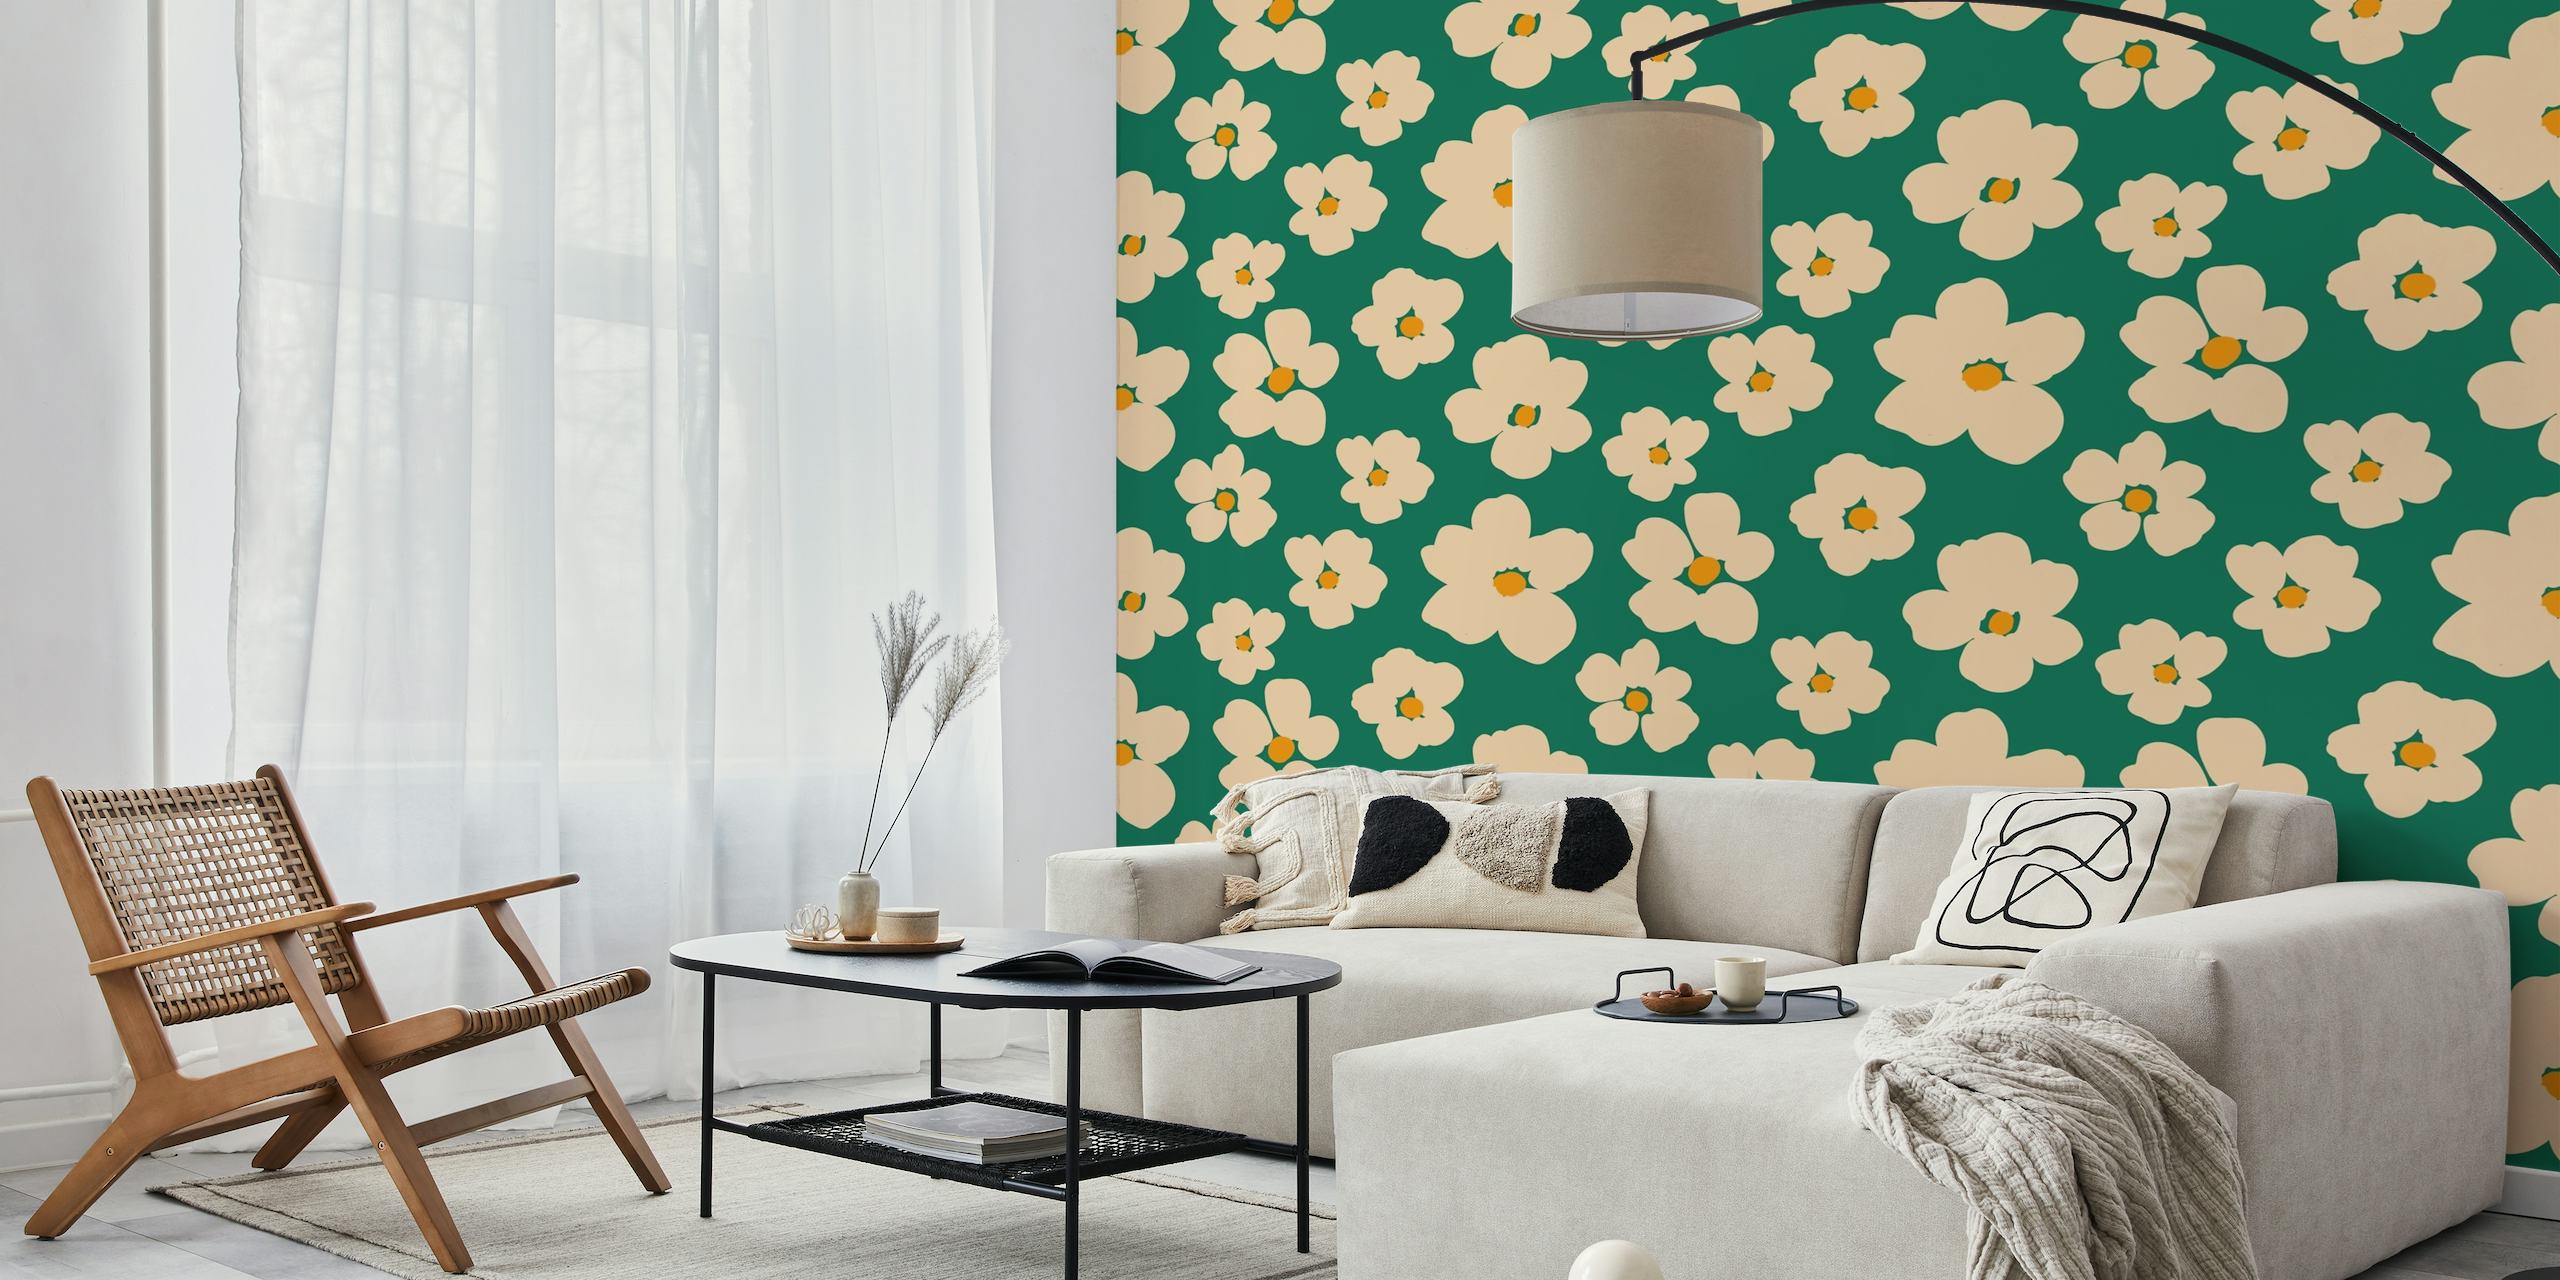 Vintage floral pattern wall mural named Kelly with emerald green background and pale yellow flowers